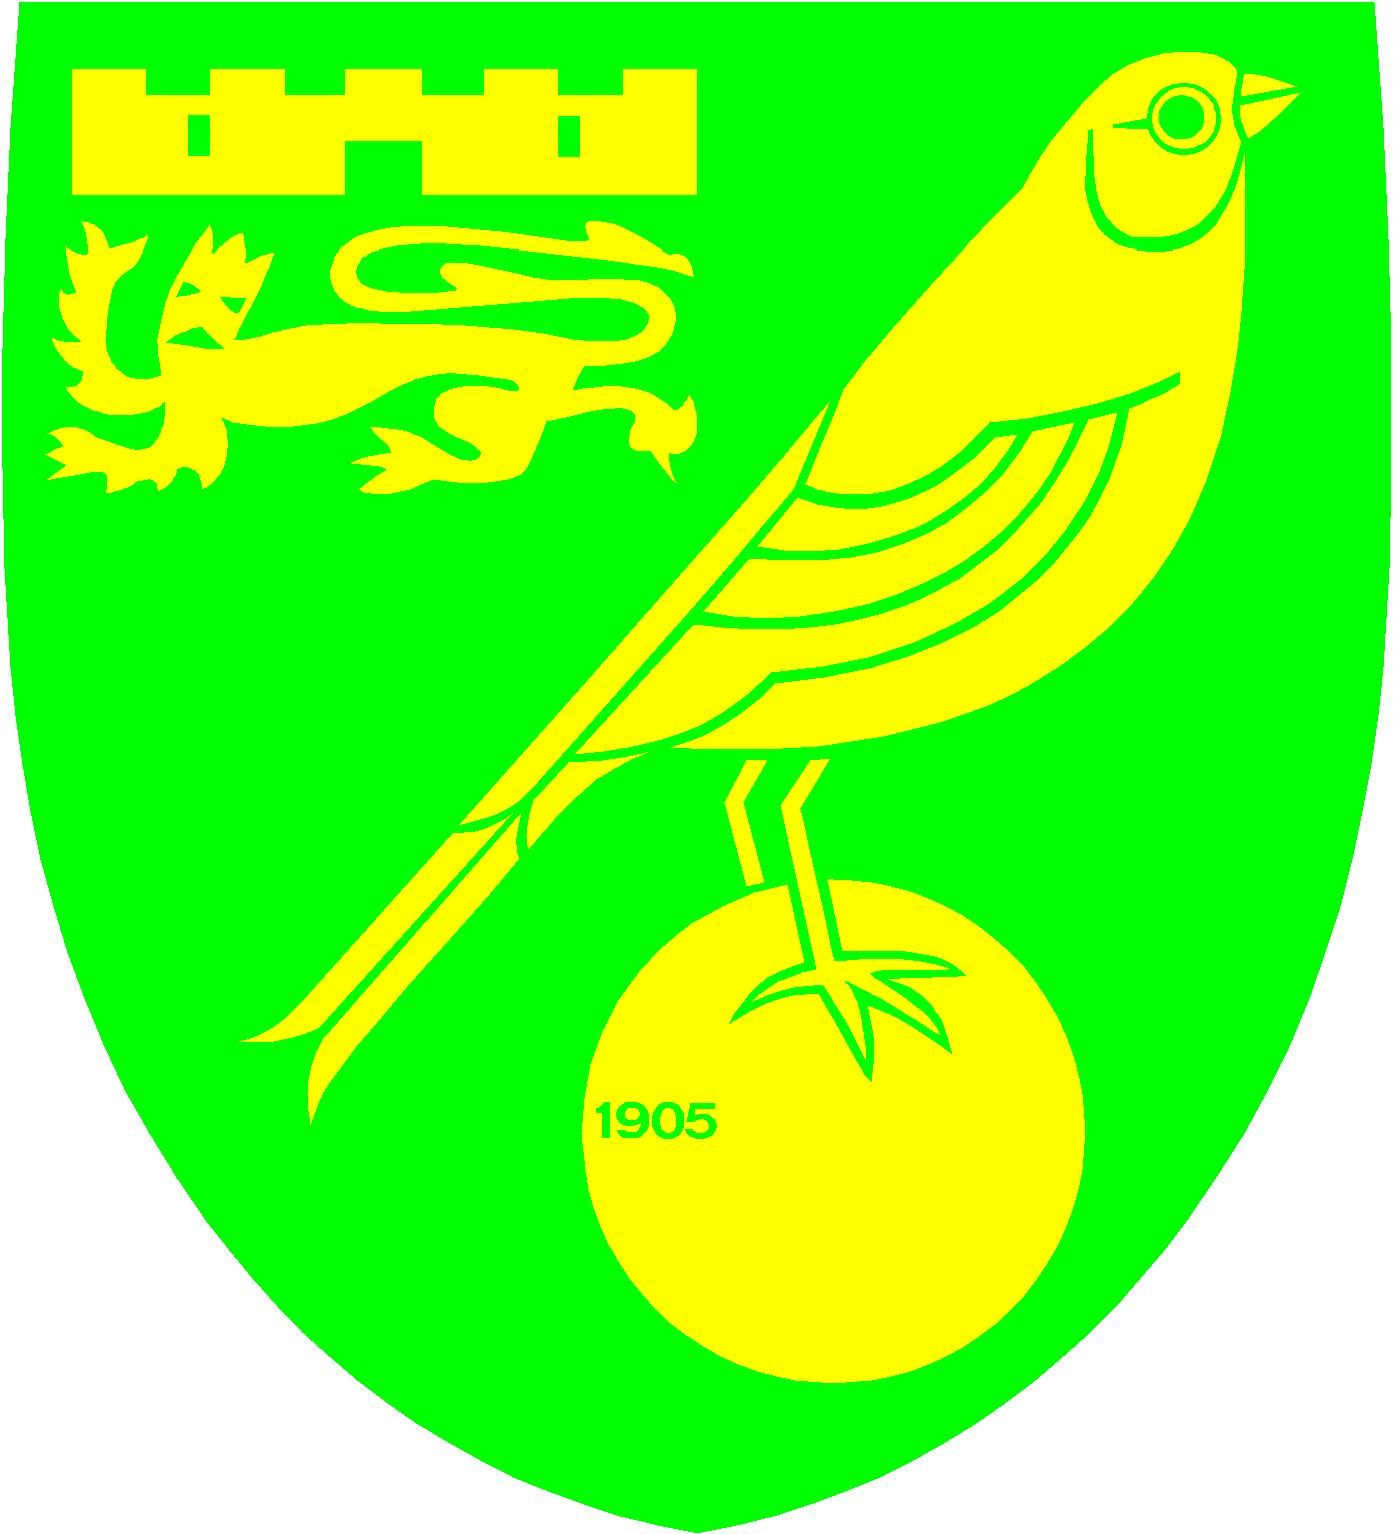 Norwich City Wallpaper : Norwich City Fc Wood Iphone 4 Background - A